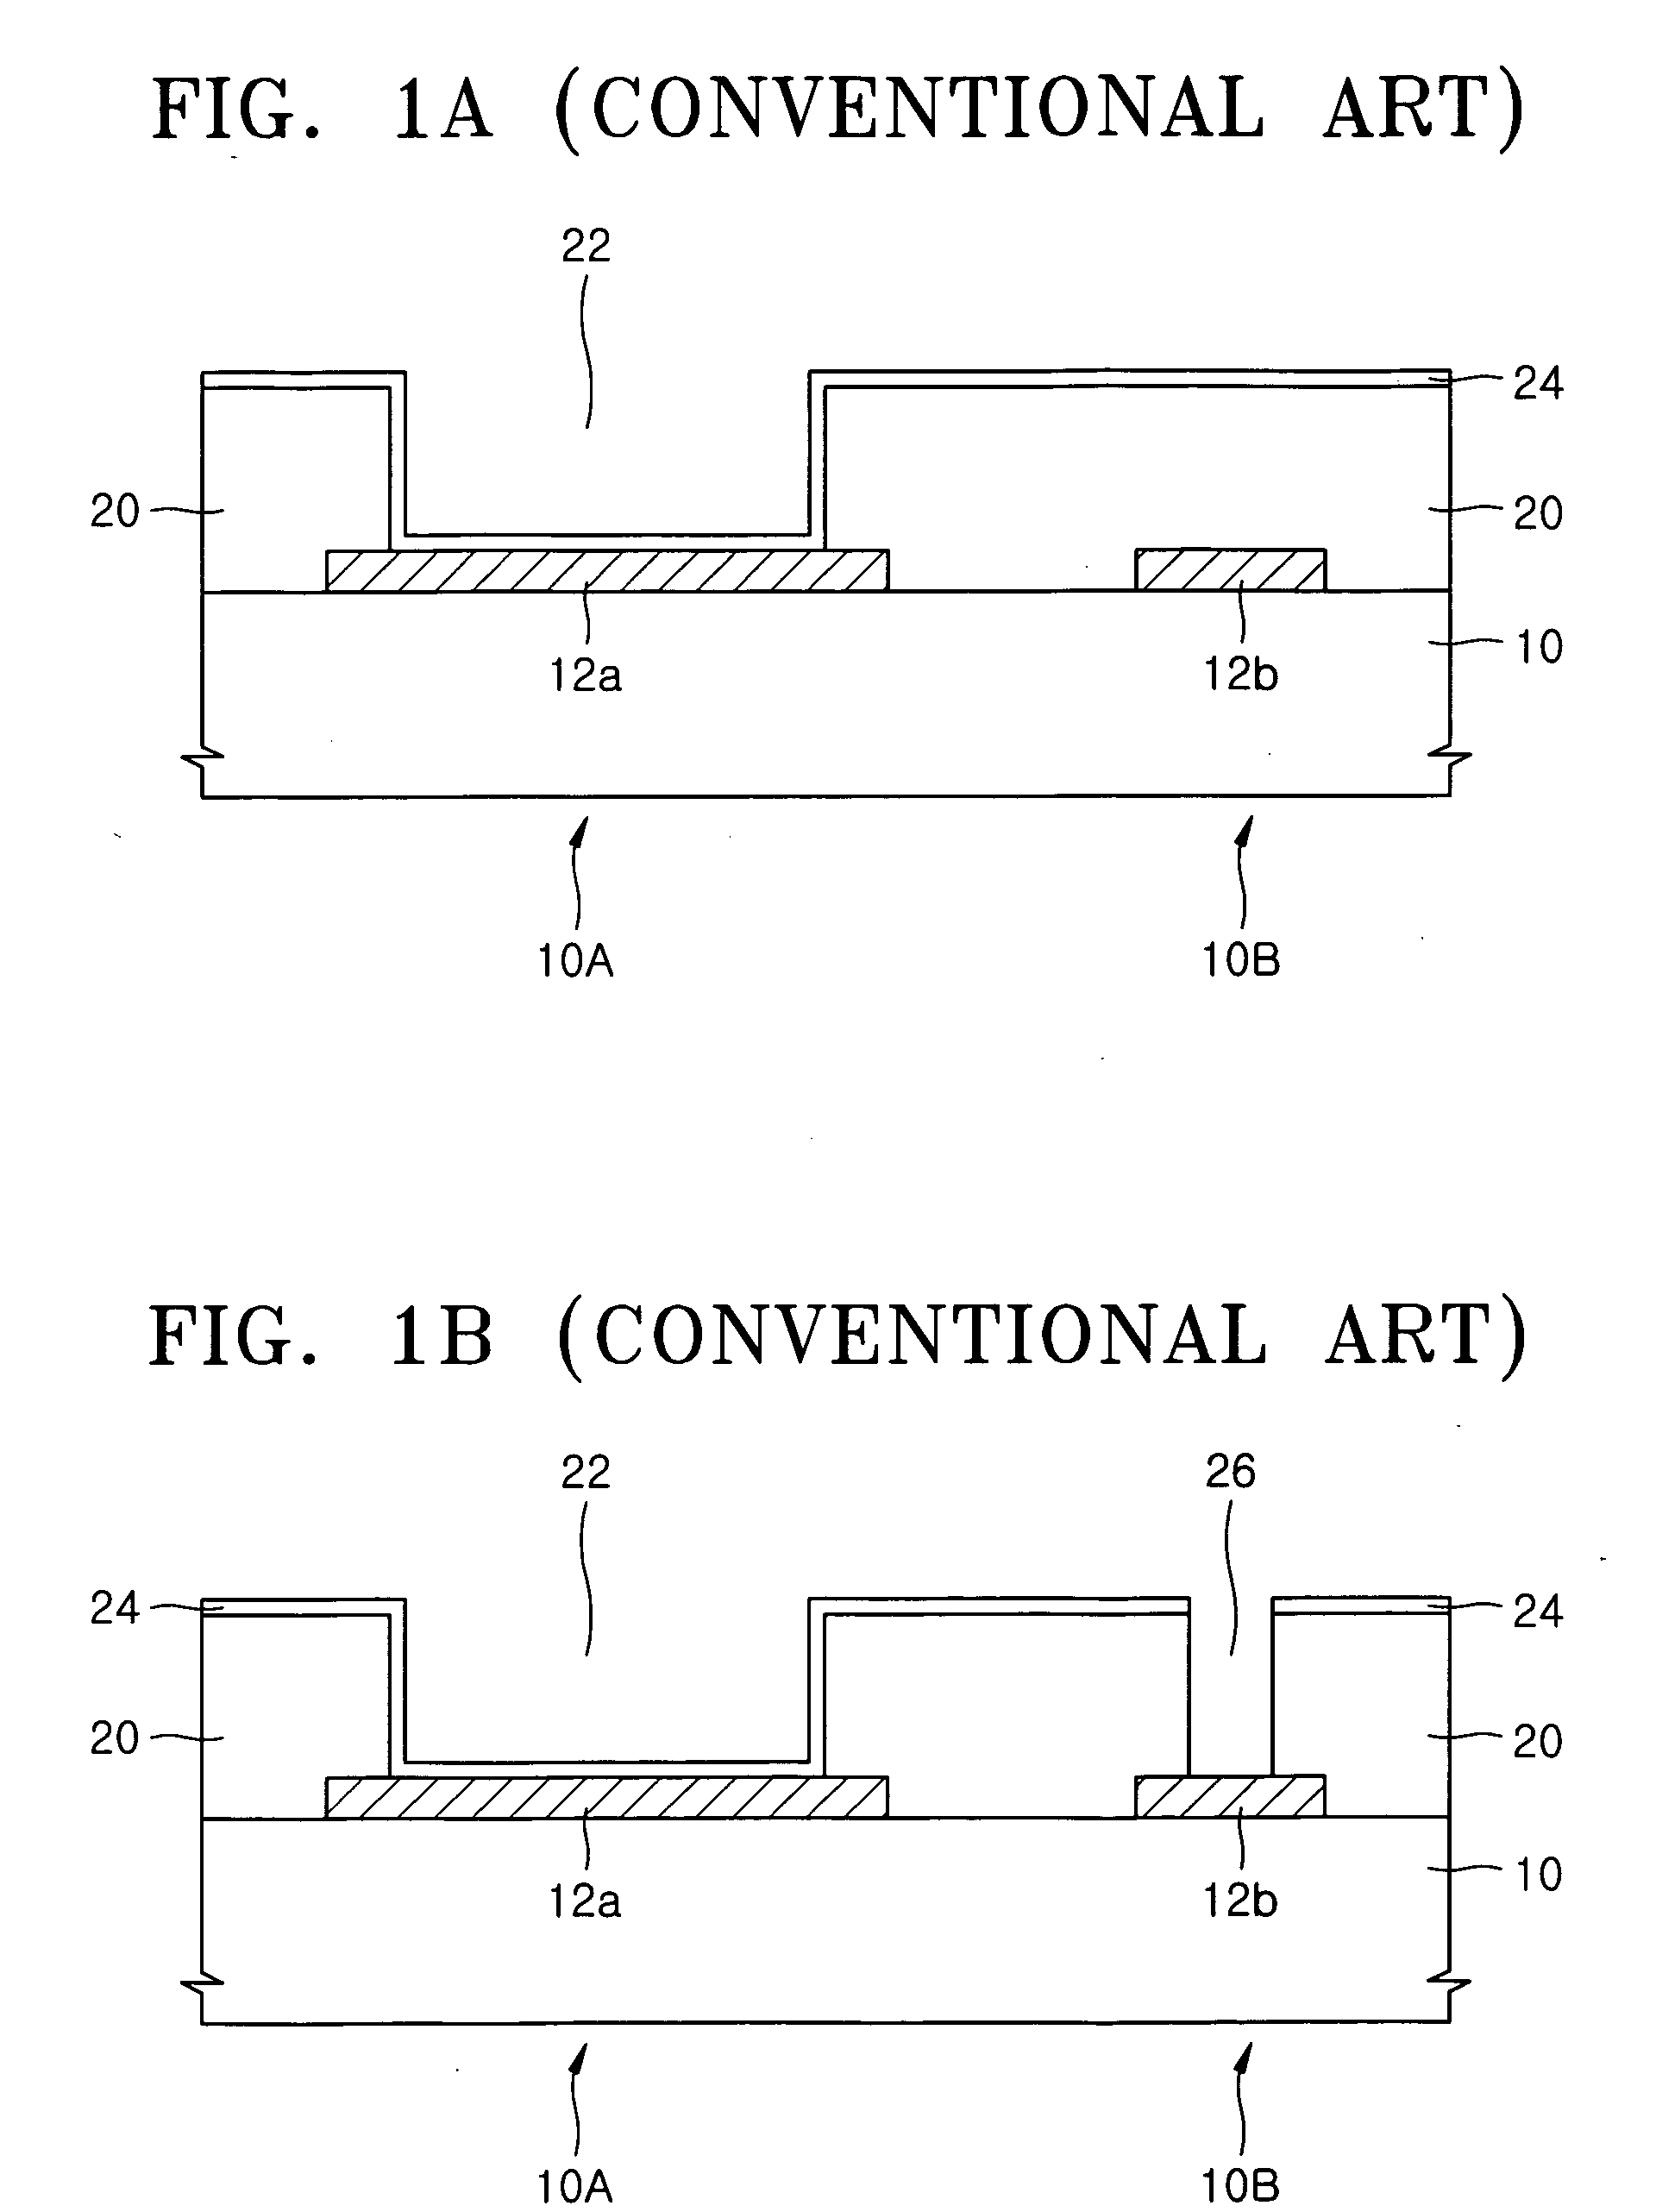 Semiconductor device including a trench-type metal-insulator-metal (MIM) capacitor and method of fabricating the same